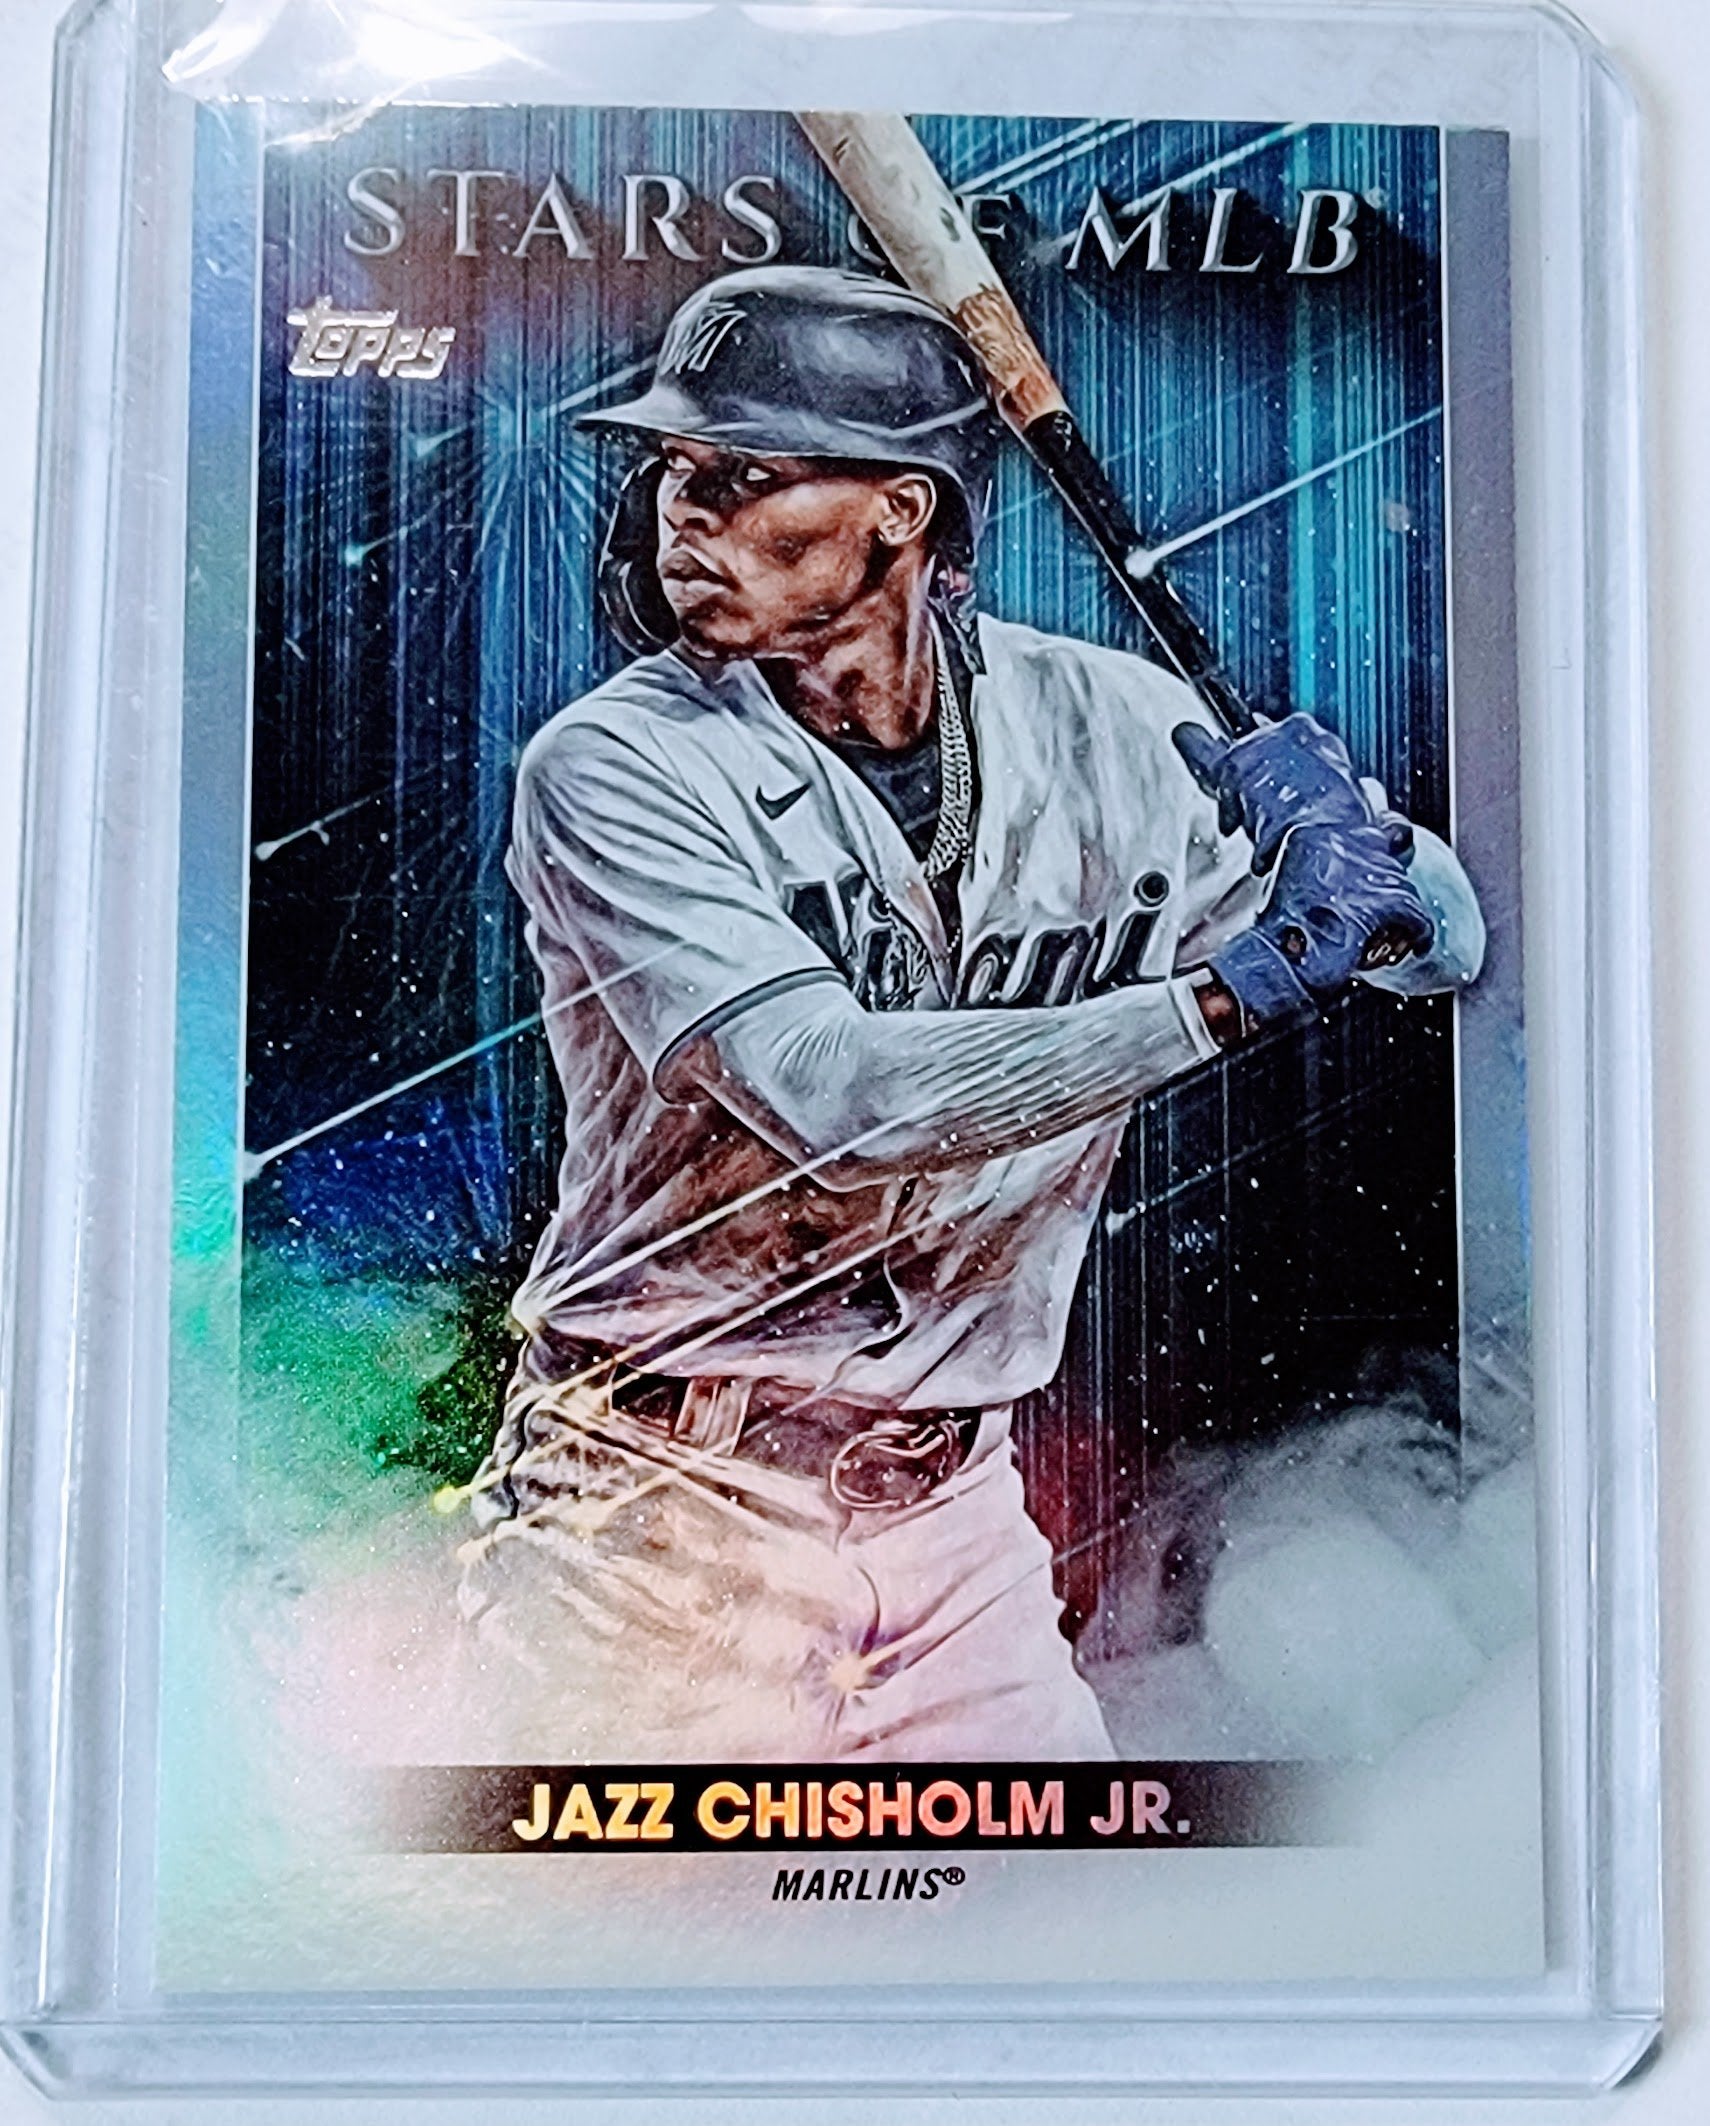 2022 Topps Jazz Chisolm Jr Stars of the MLB Baseball Trading Card GRB1 simple Xclusive Collectibles   